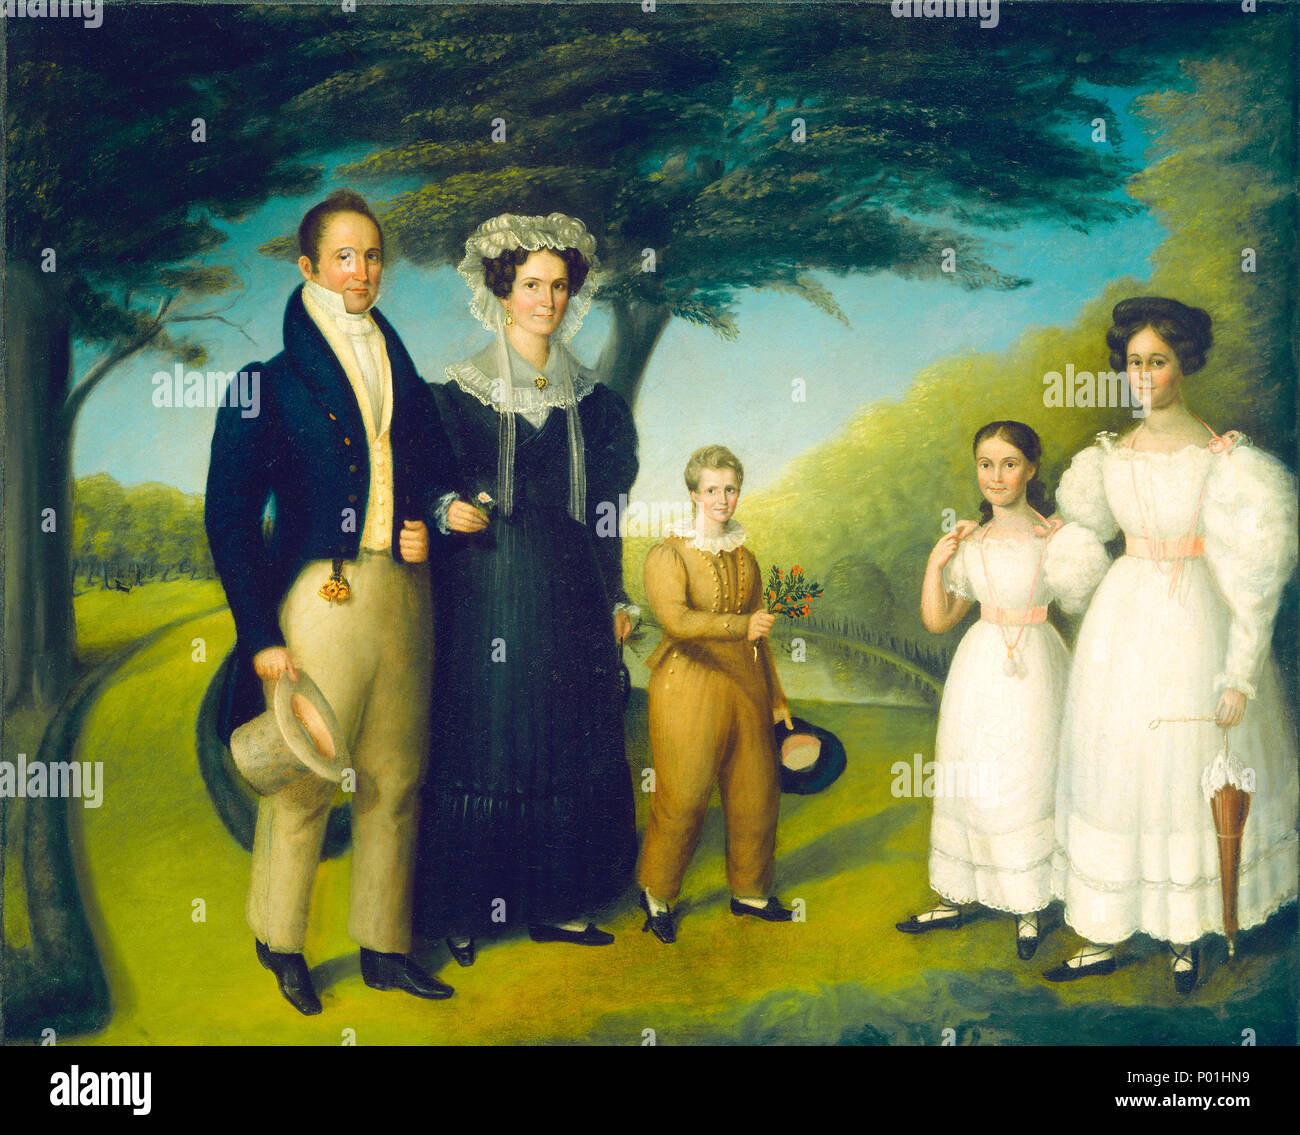 Attributed to Reuben Rowley, Dr. John Safford and Family, American, active c. 1825/1836, c. 1830, oil on canvas, Gift of Edgar William and Bernice Chrysler Garbisch 8 Dr. John Safford and Family G-001991-20120817 Stock Photo